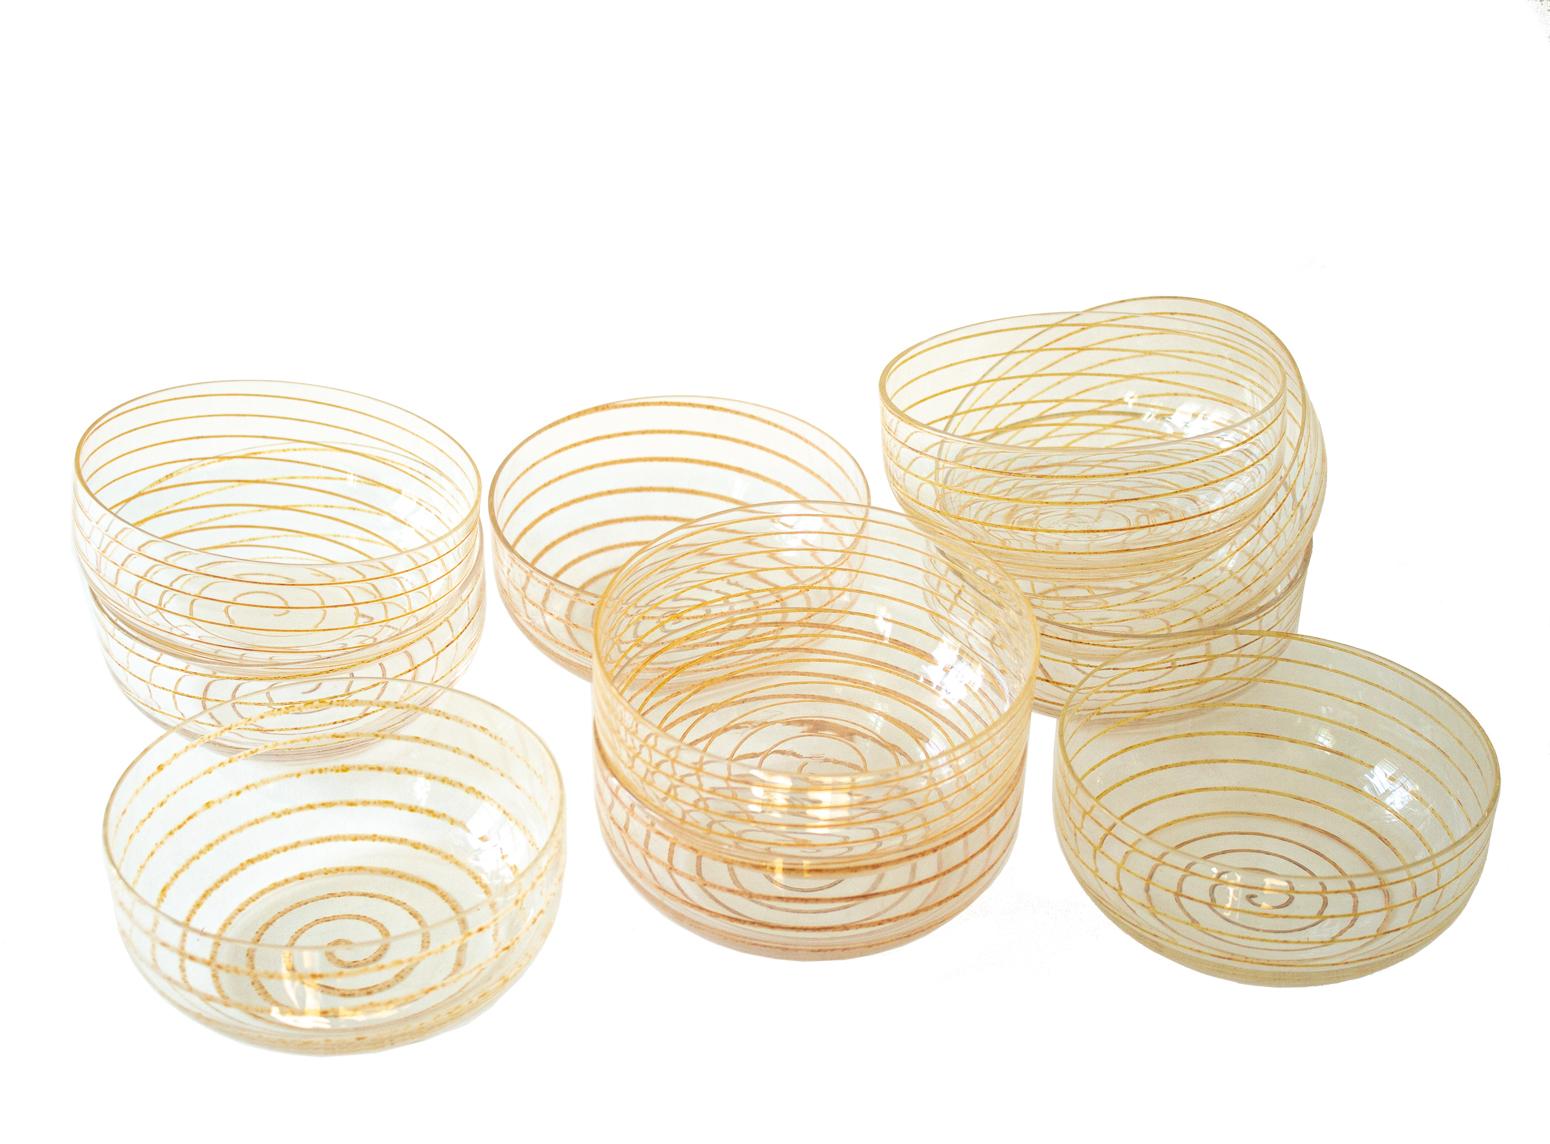 10 Mid-Century Modern elegant Cenedese Murano serving bowls in glass with spiral, circa 1970-1990. Wonderful clear glass with a colorful beige spiral inclusion.